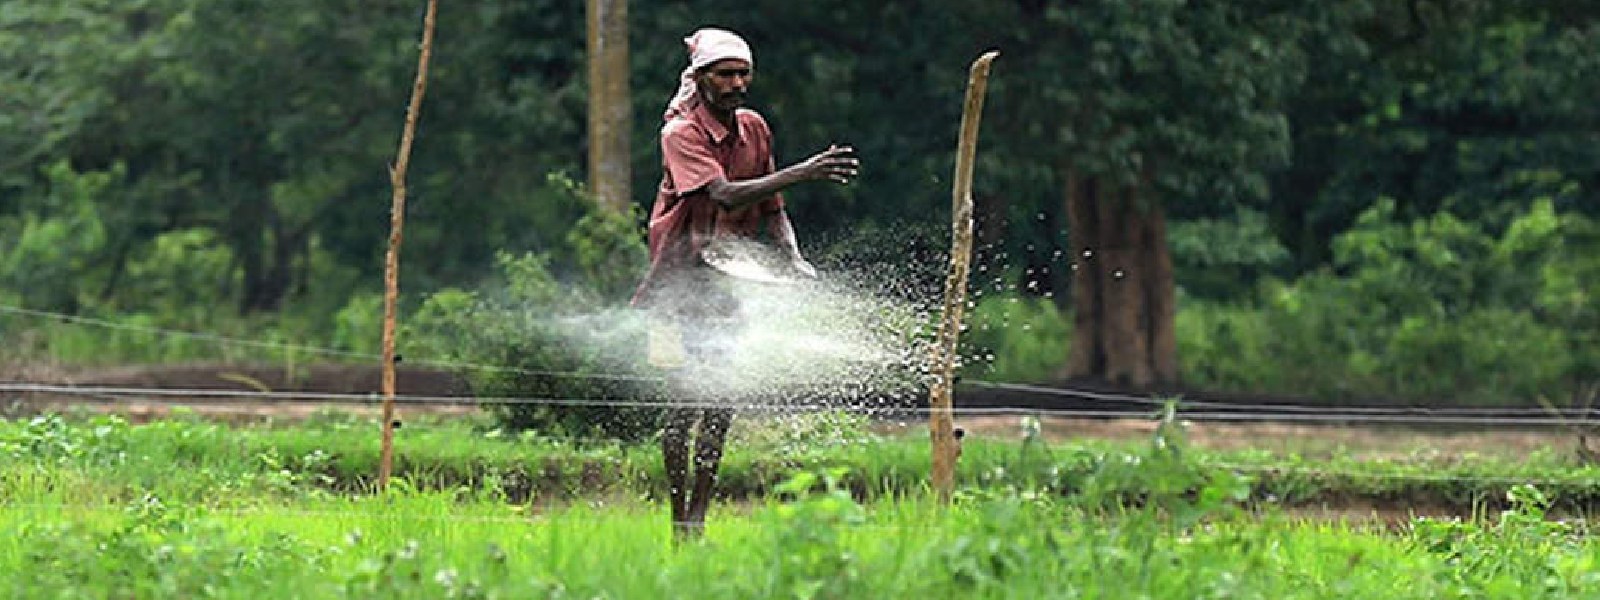 Rs. 40,000Mn allocated for farmer compensation